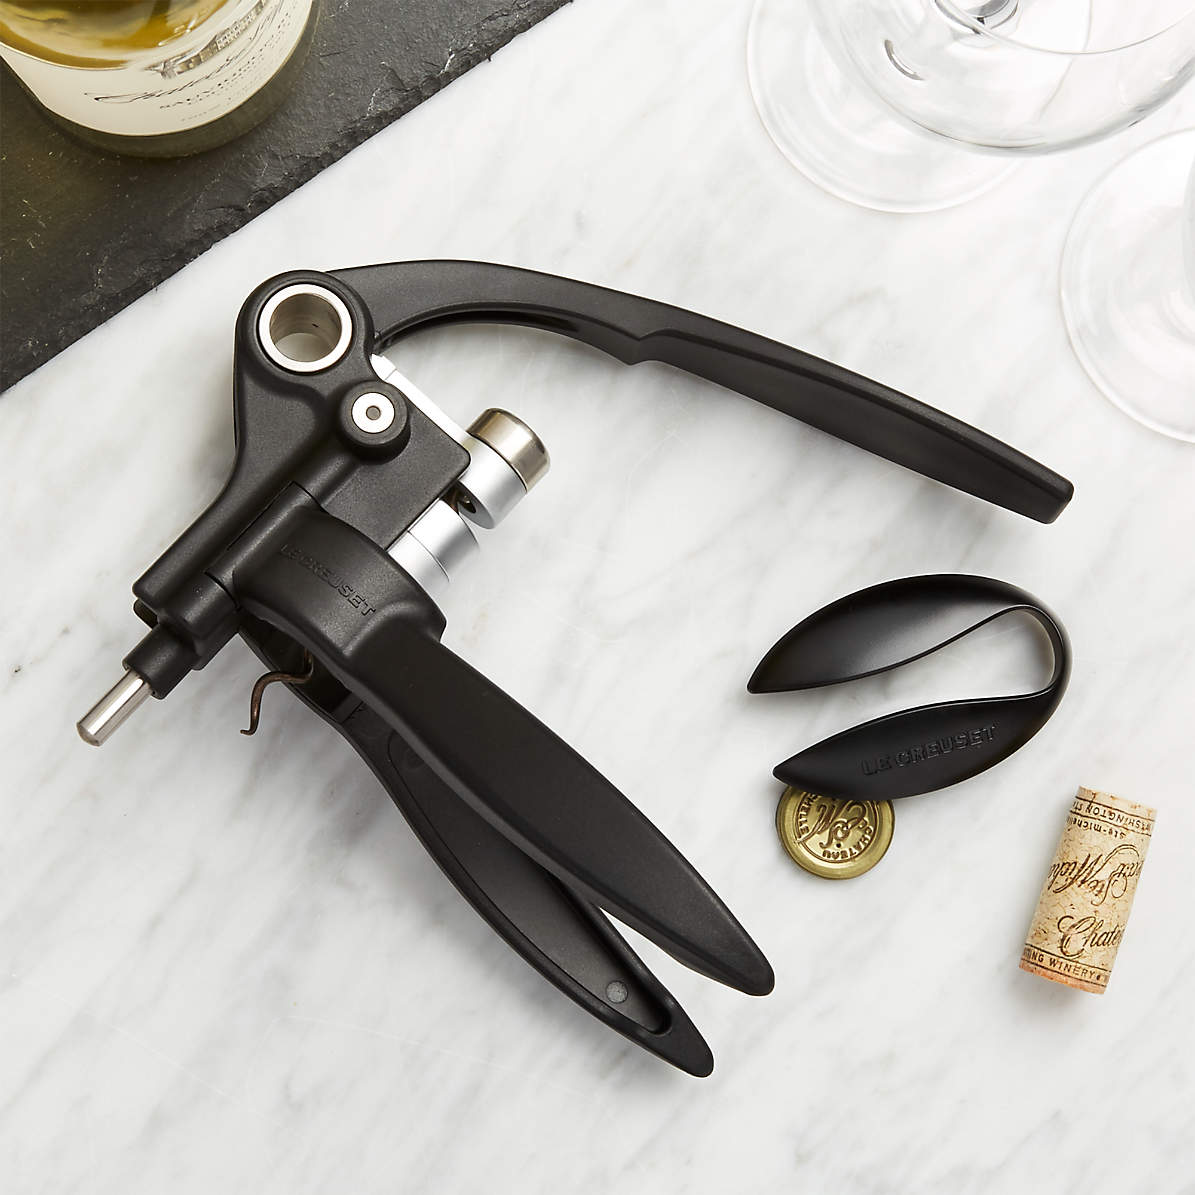 Le Lever Wine Opener and Cutter + Reviews | Crate & Barrel